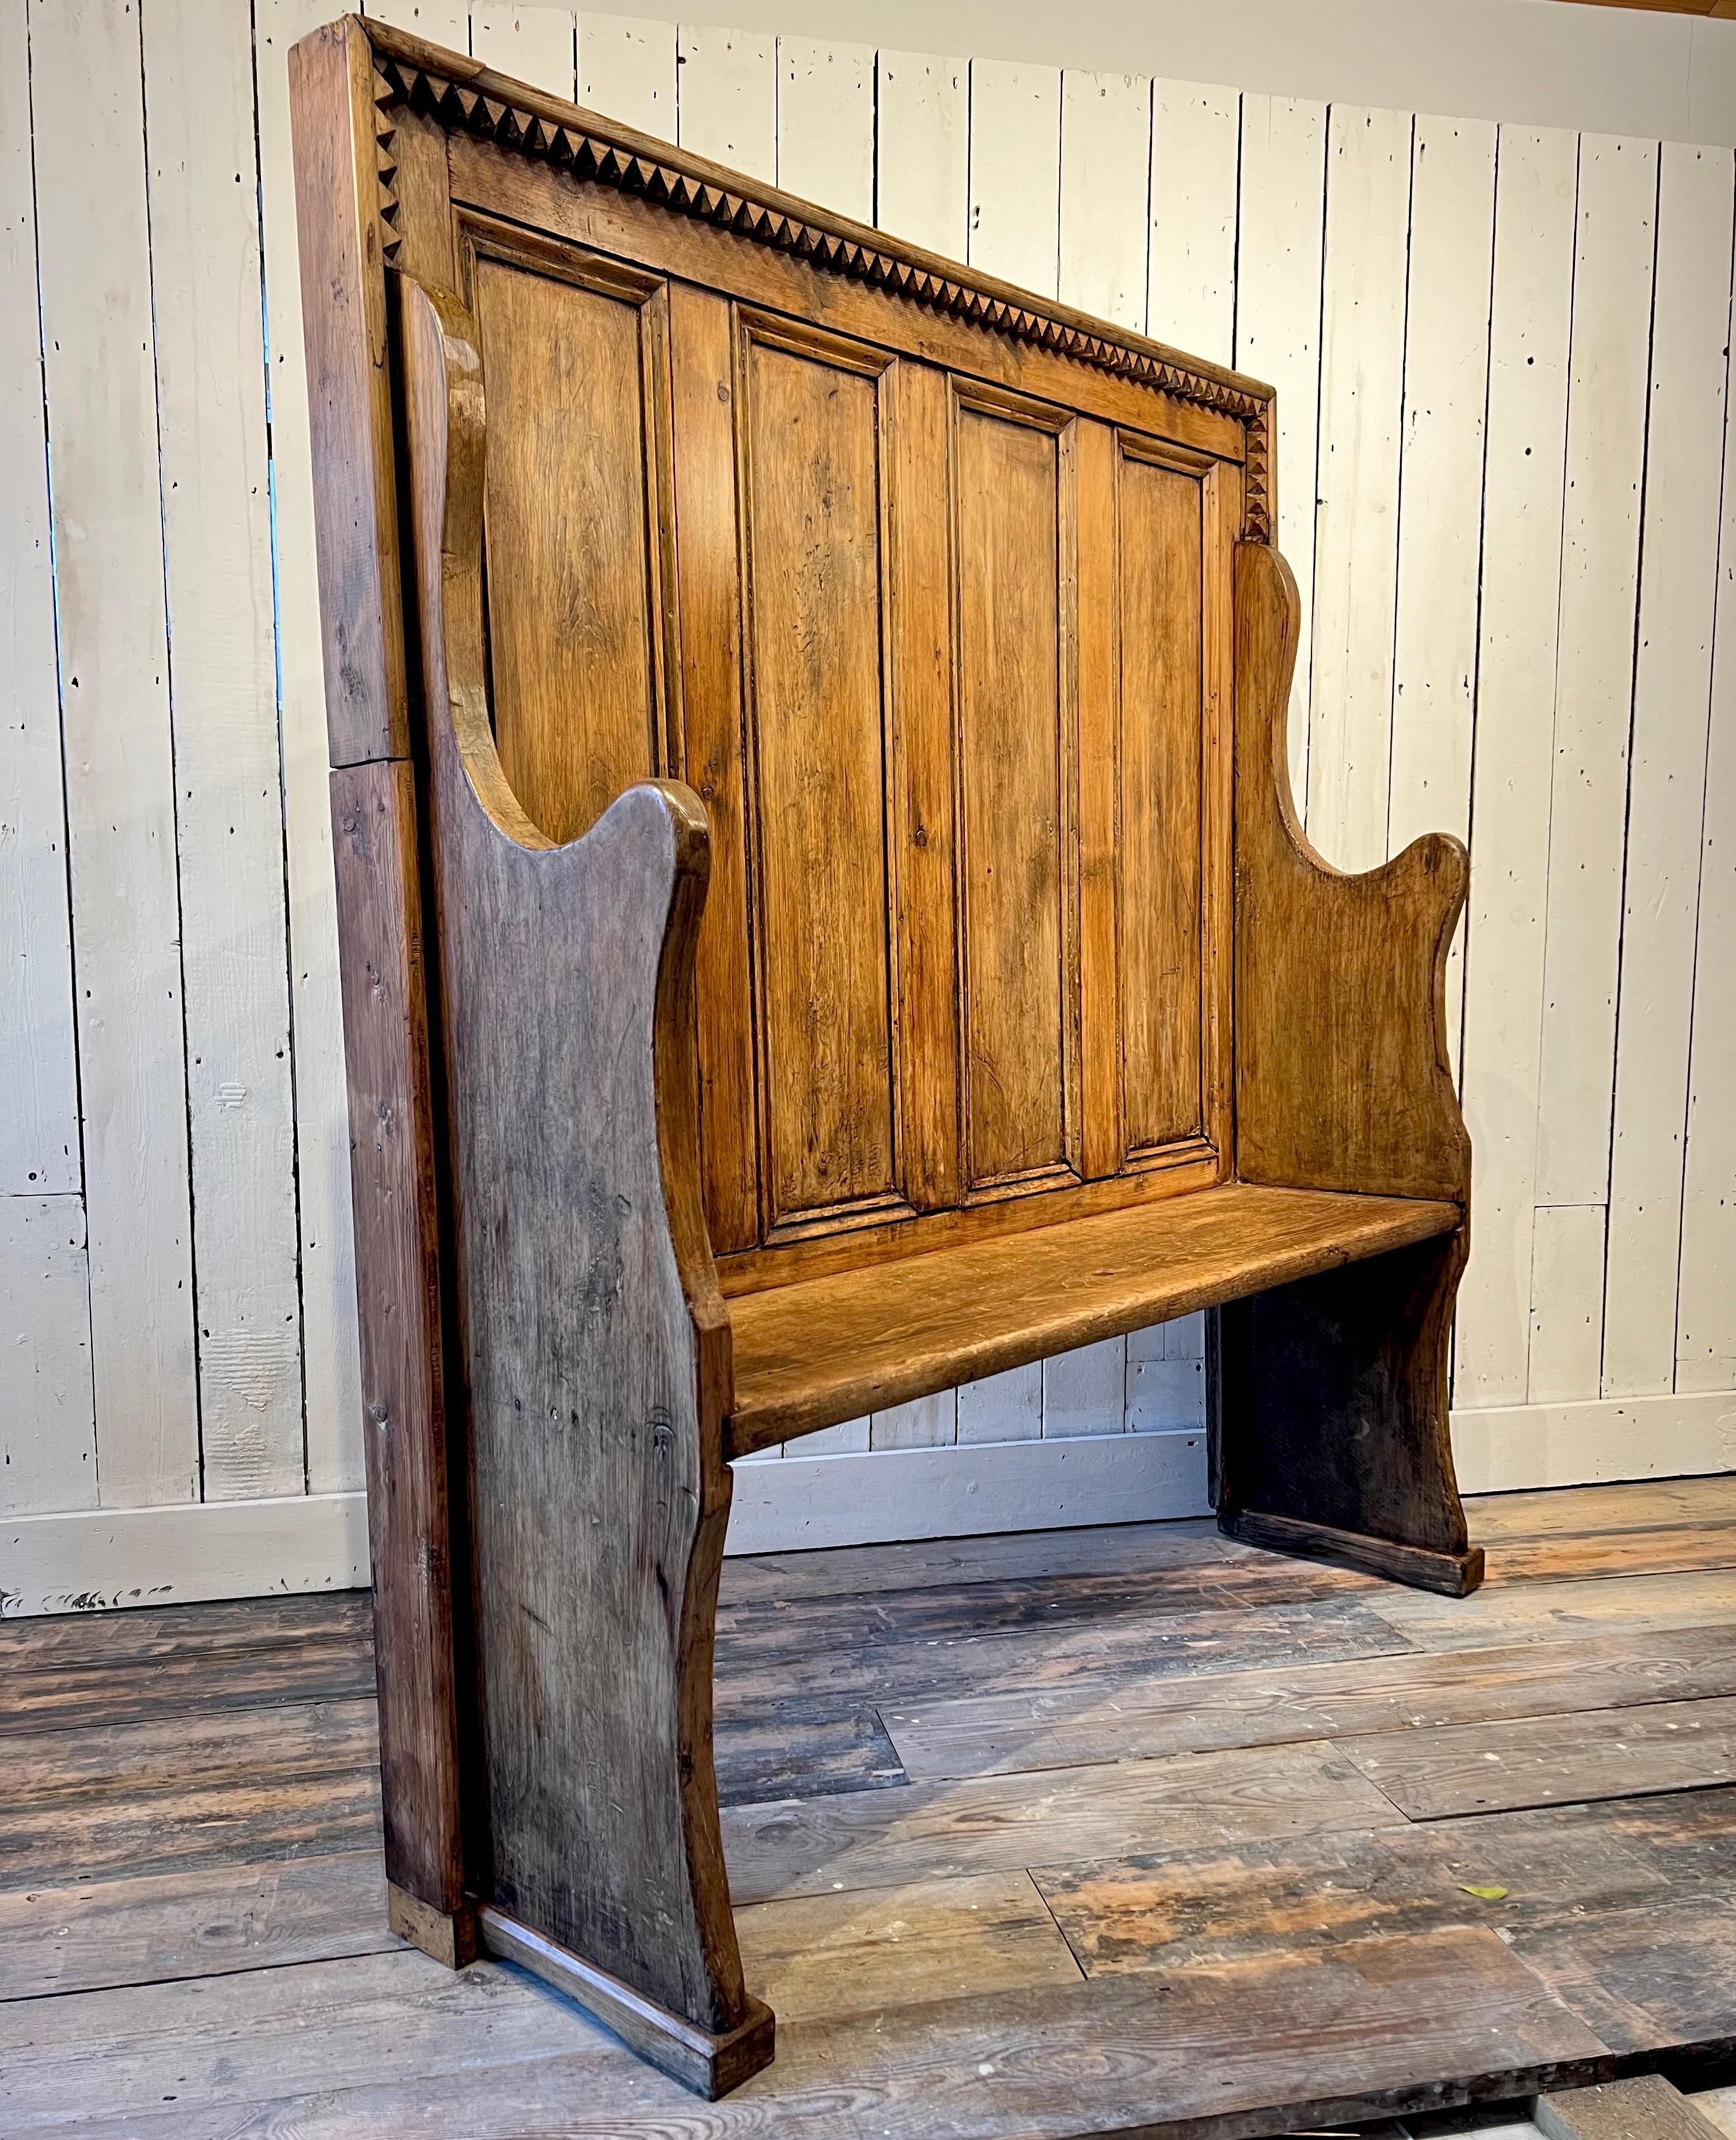 This remarkable 19th Century Victorian Gothic Revival Pine Settle, is a true eye catcher. Its unique dragon teeth motif detail adds a sense of mystery and intrigue to any room or hall. Crafted from pitch pine, this piece boasts a mid Oak finish and